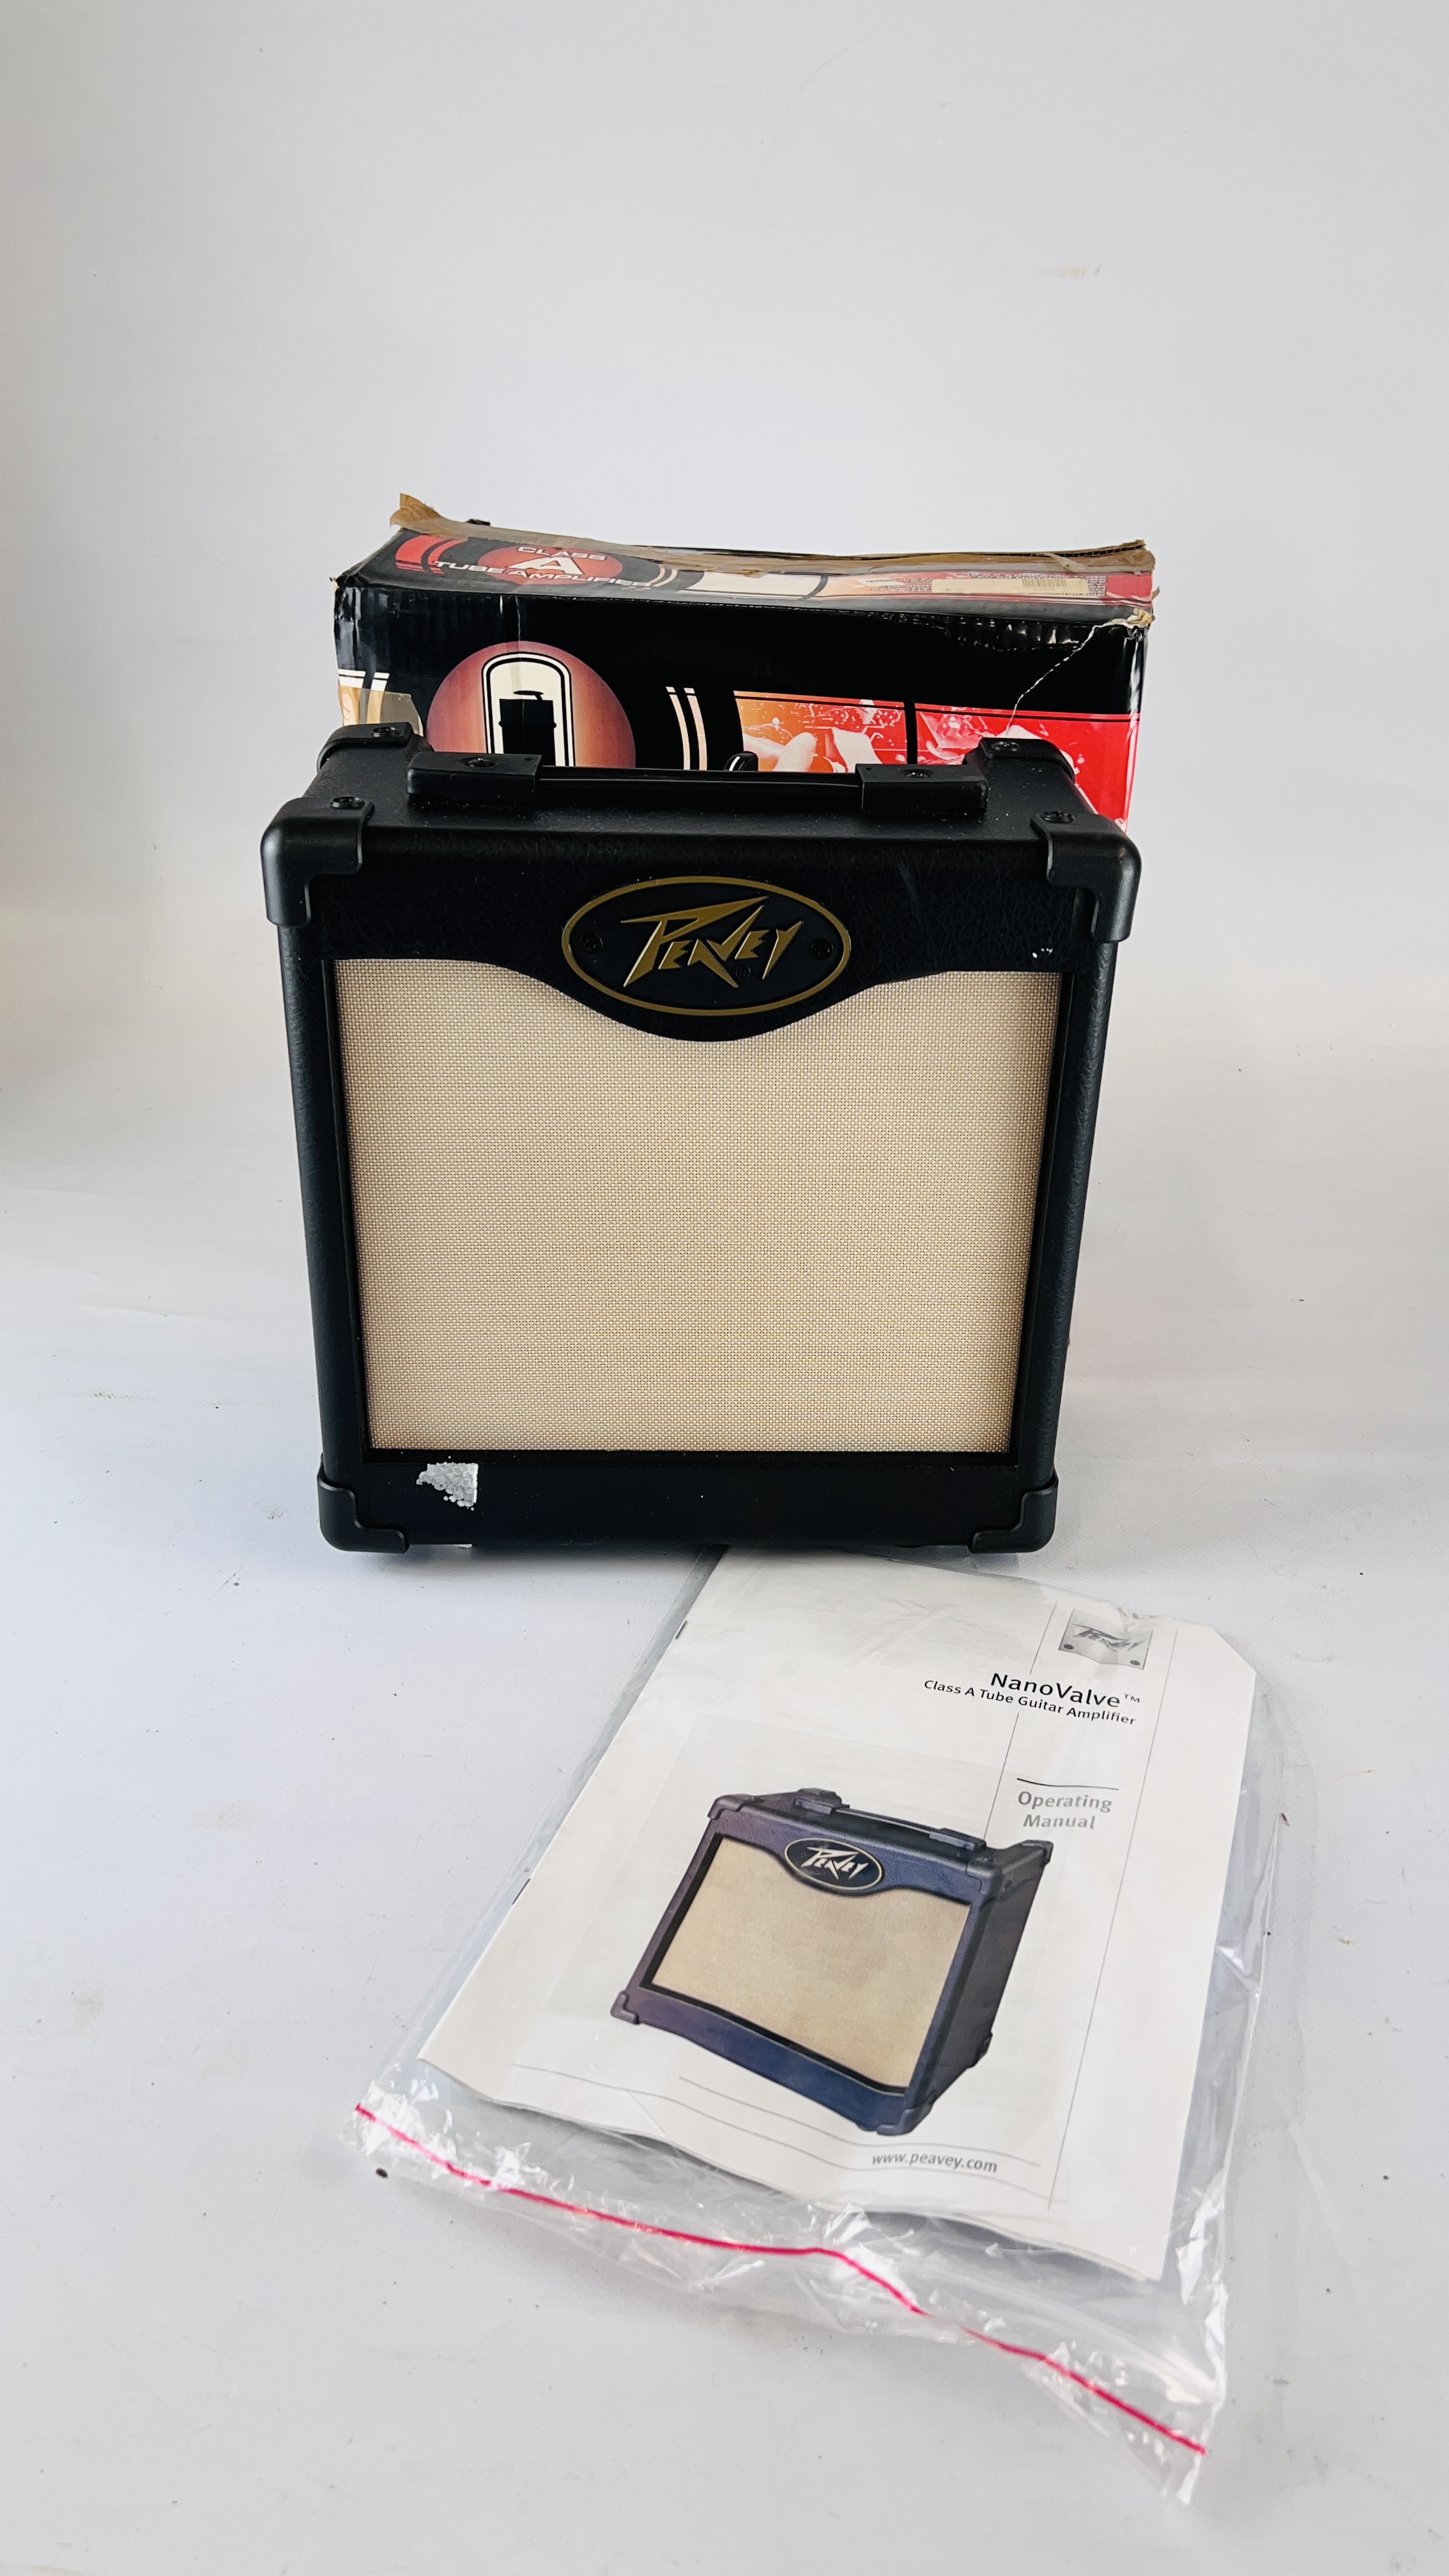 BOXED NANO VALVE PEAVEY PRACTICE AMP - SOLD AS SEEN.